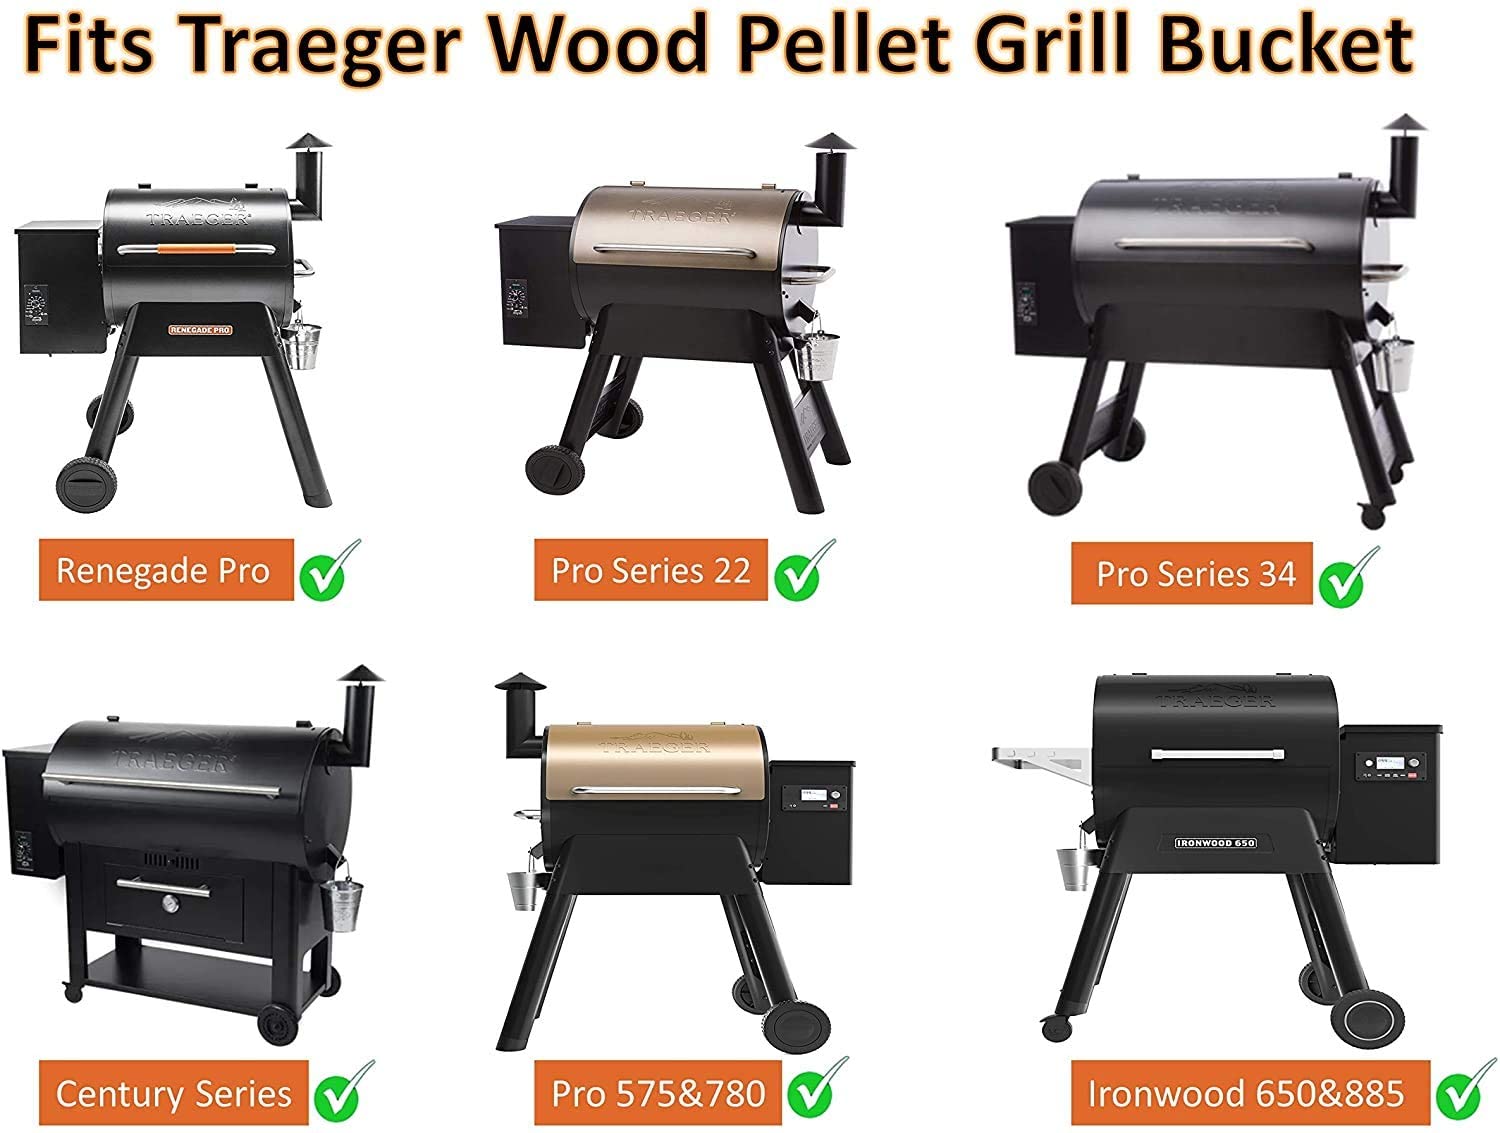 Grill Grease Bucket Liners Replacement Parts for Traeger Wood Pellet Grill & Smoker,25-Pack